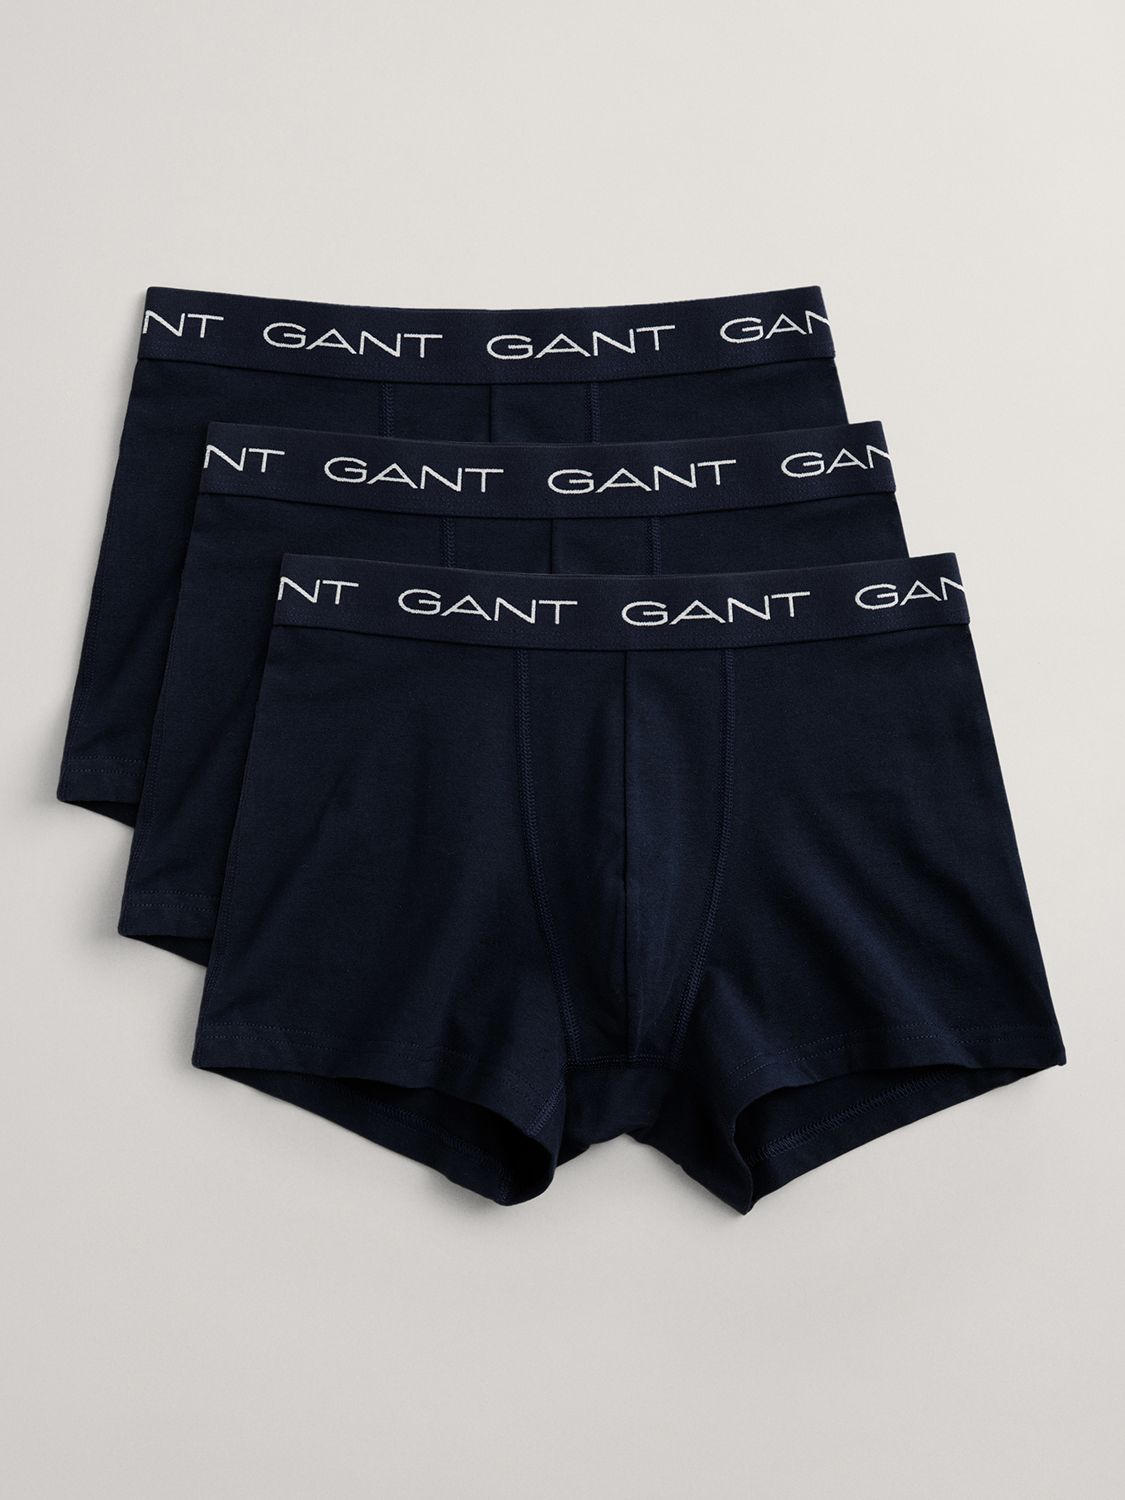 GANT Cotton Stretch Jersey Trunks, Pack of 3, Navy at John Lewis & Partners